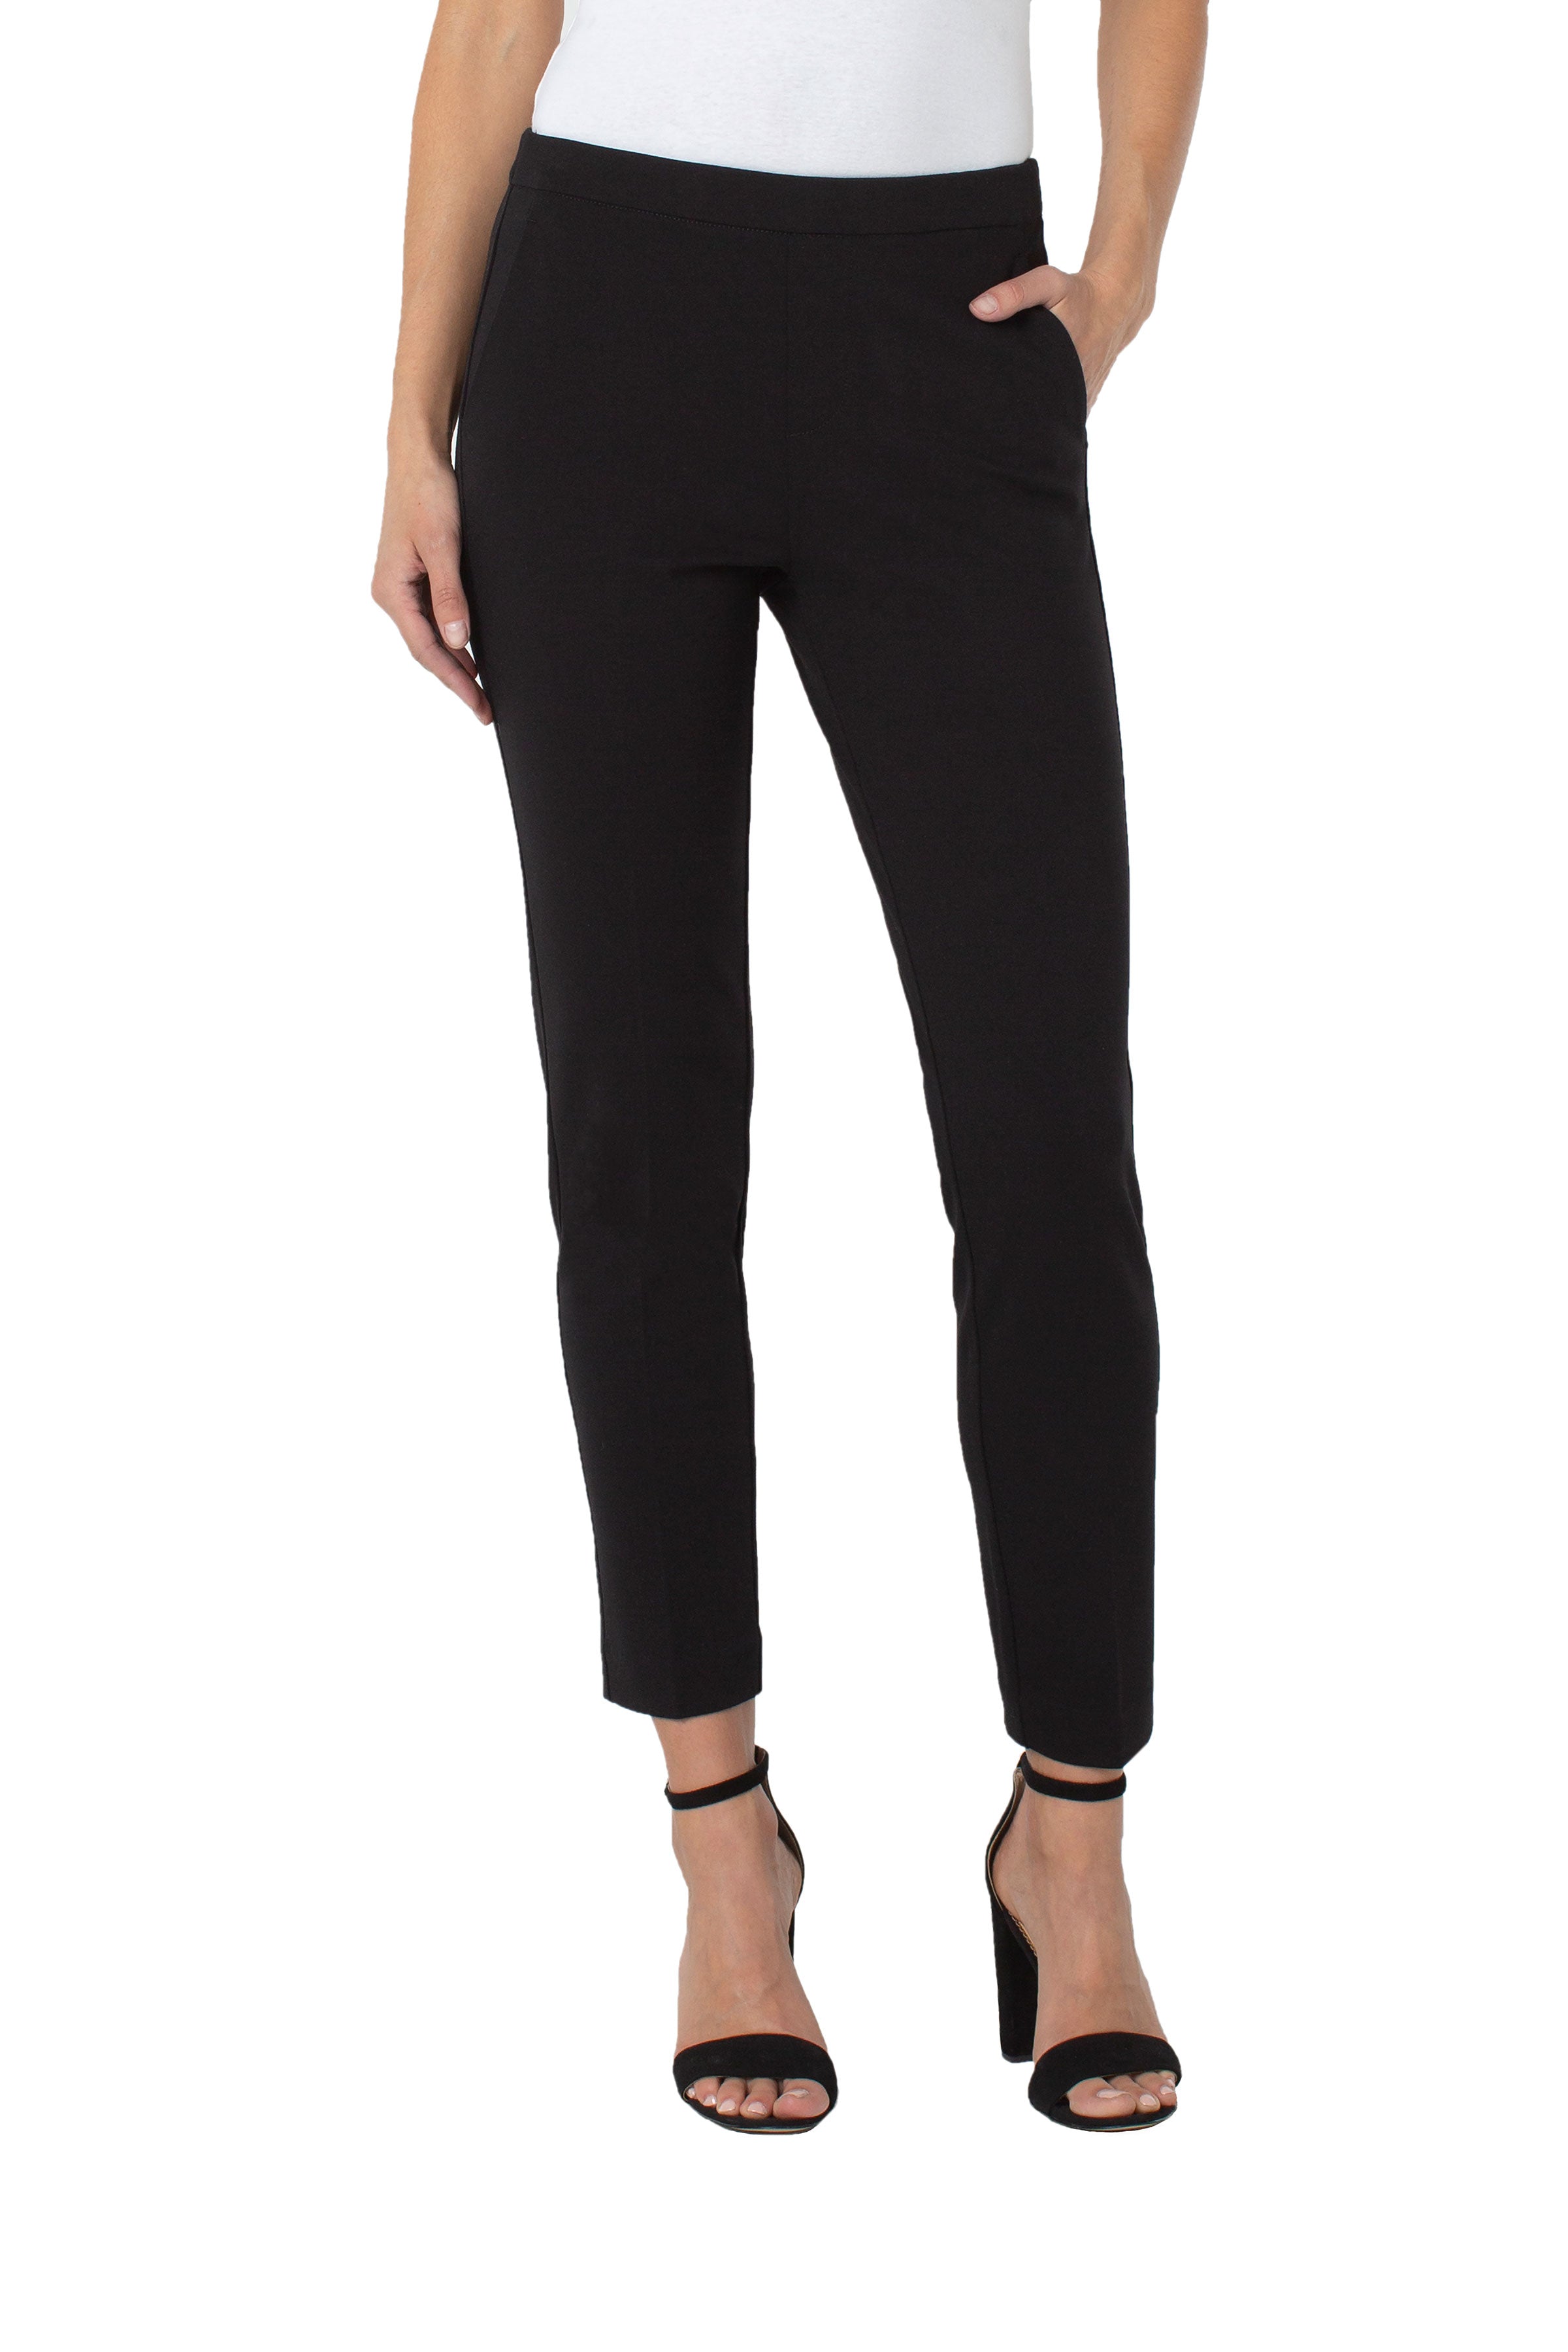 Liverpool KAYLA PULL-ON TROUSER